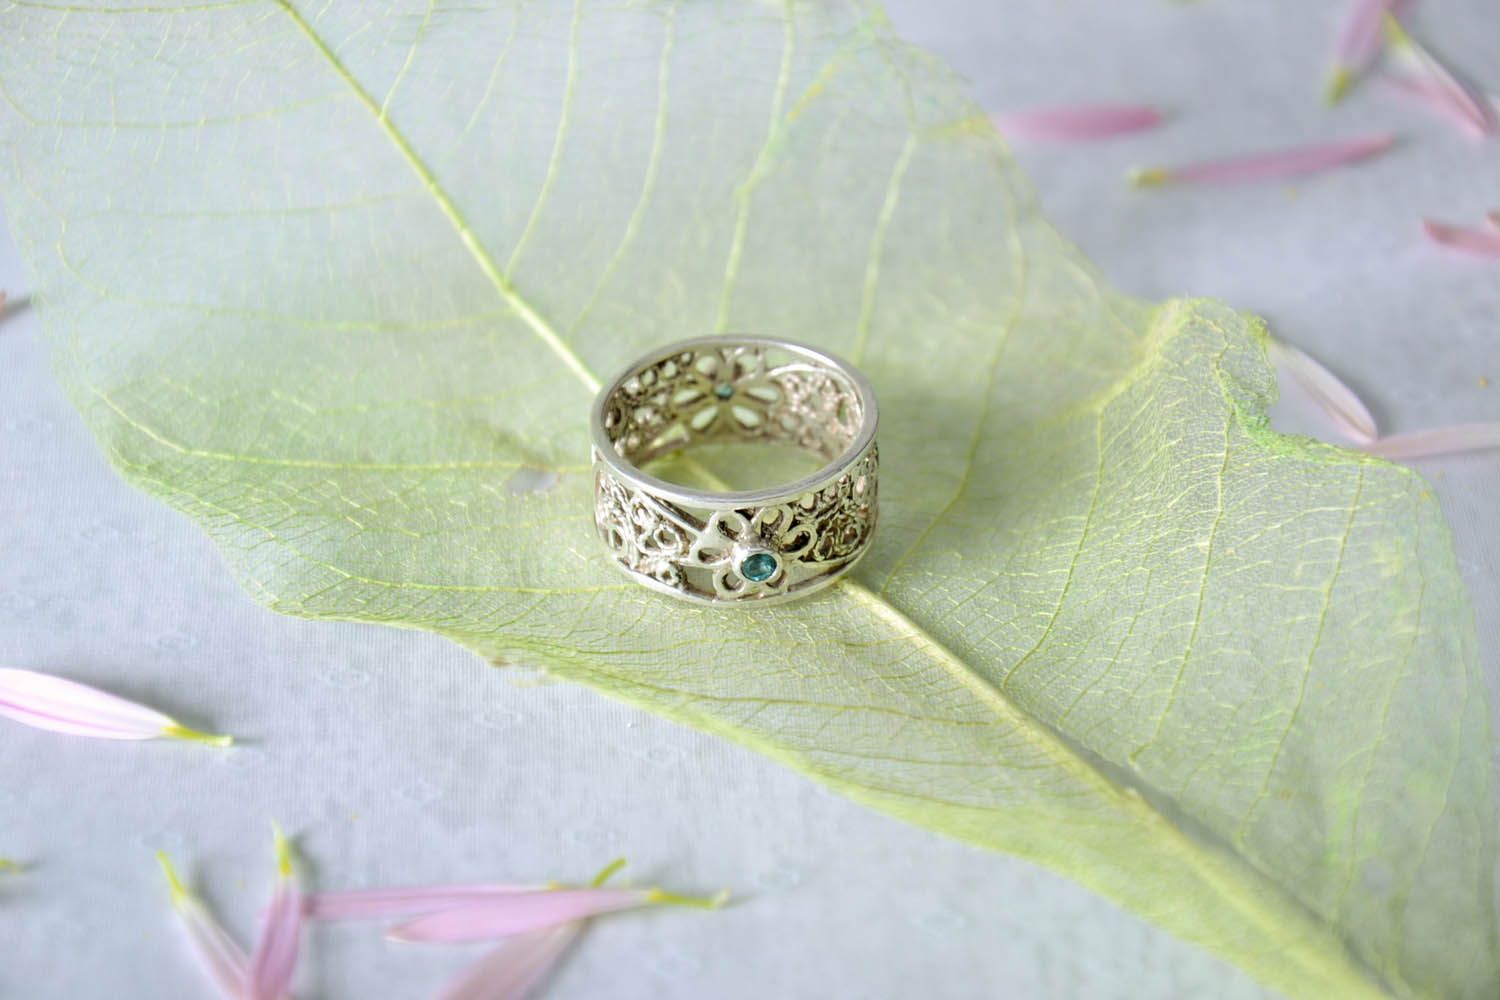 Homemade silver ring photo 1